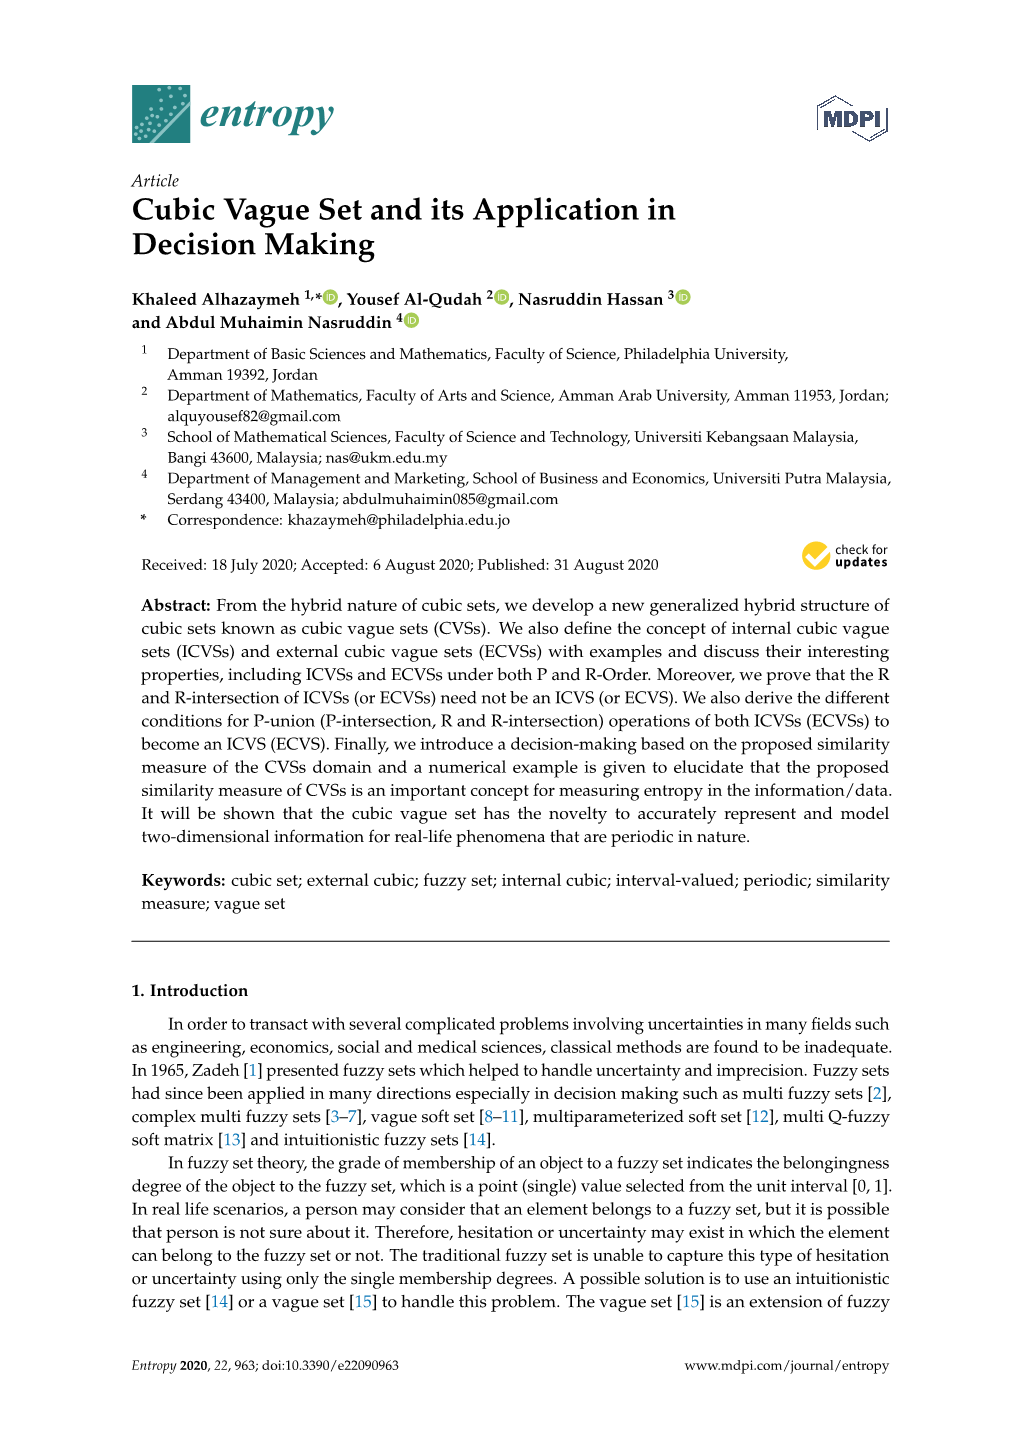 Cubic Vague Set and Its Application in Decision Making